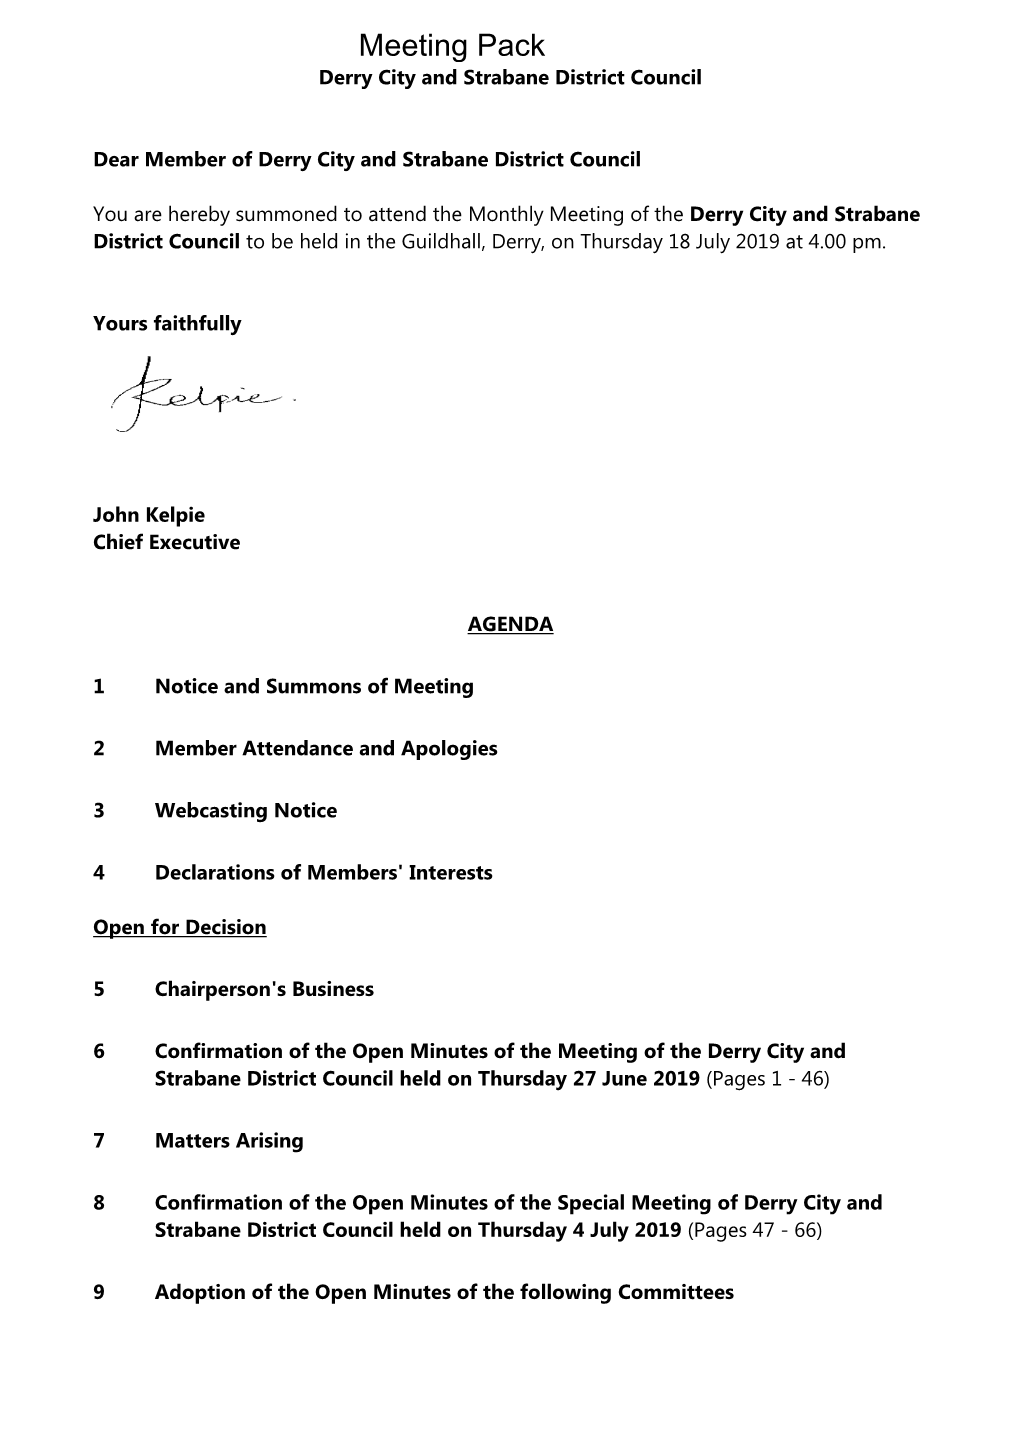 Agenda Document for Derry City and Strabane District Council (Open)